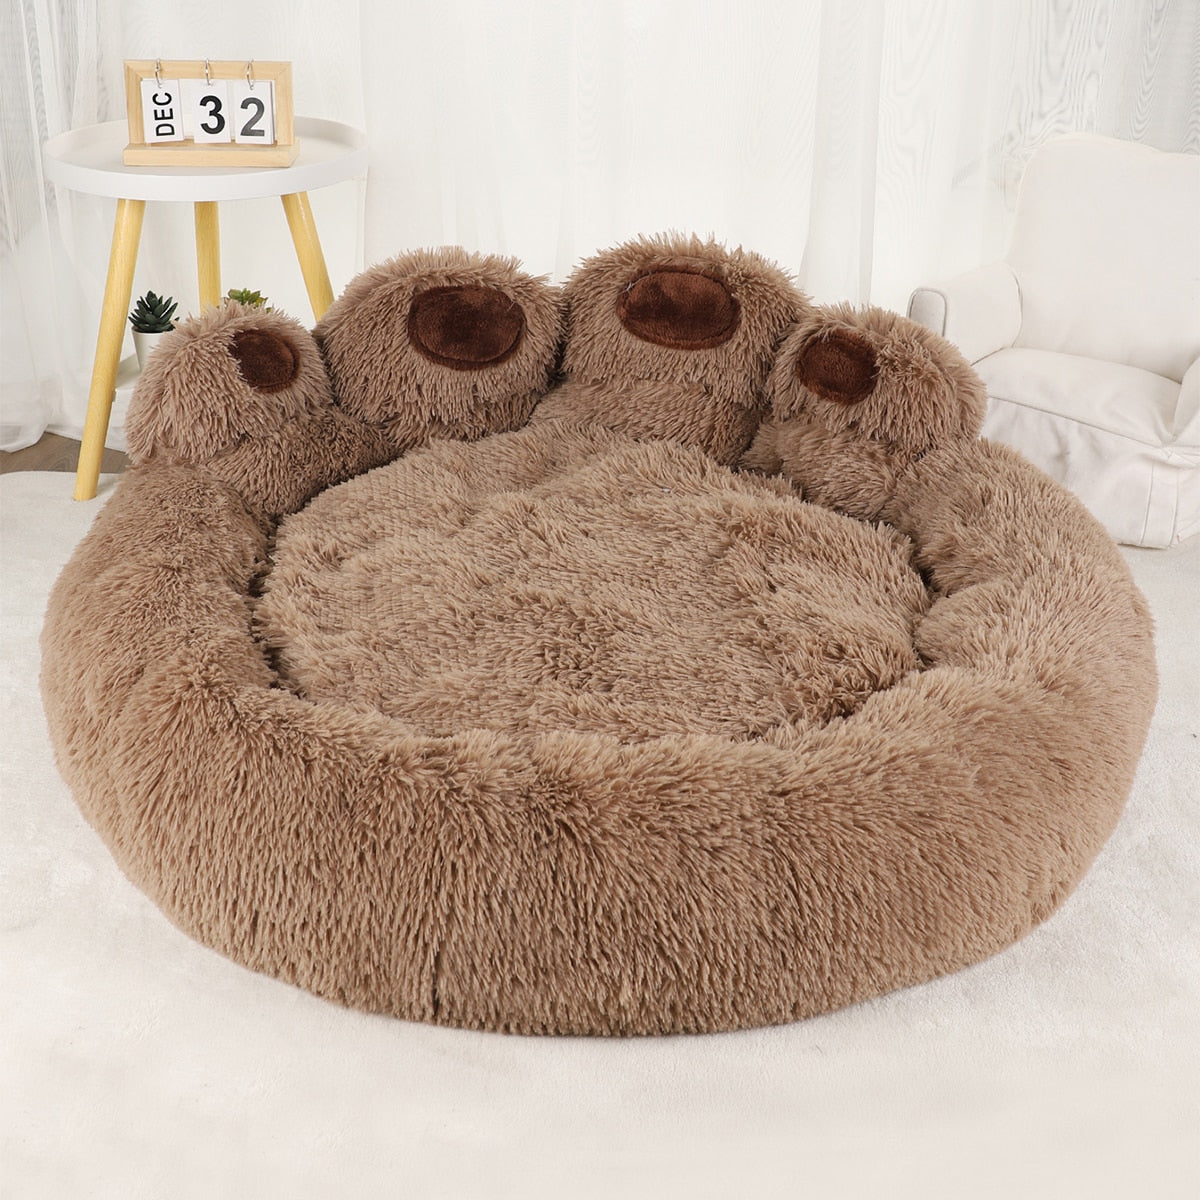 PamperedPups™ - #1 Top-Rated Anti-Anxiety Calming Donut Bed for Cats and Dogs